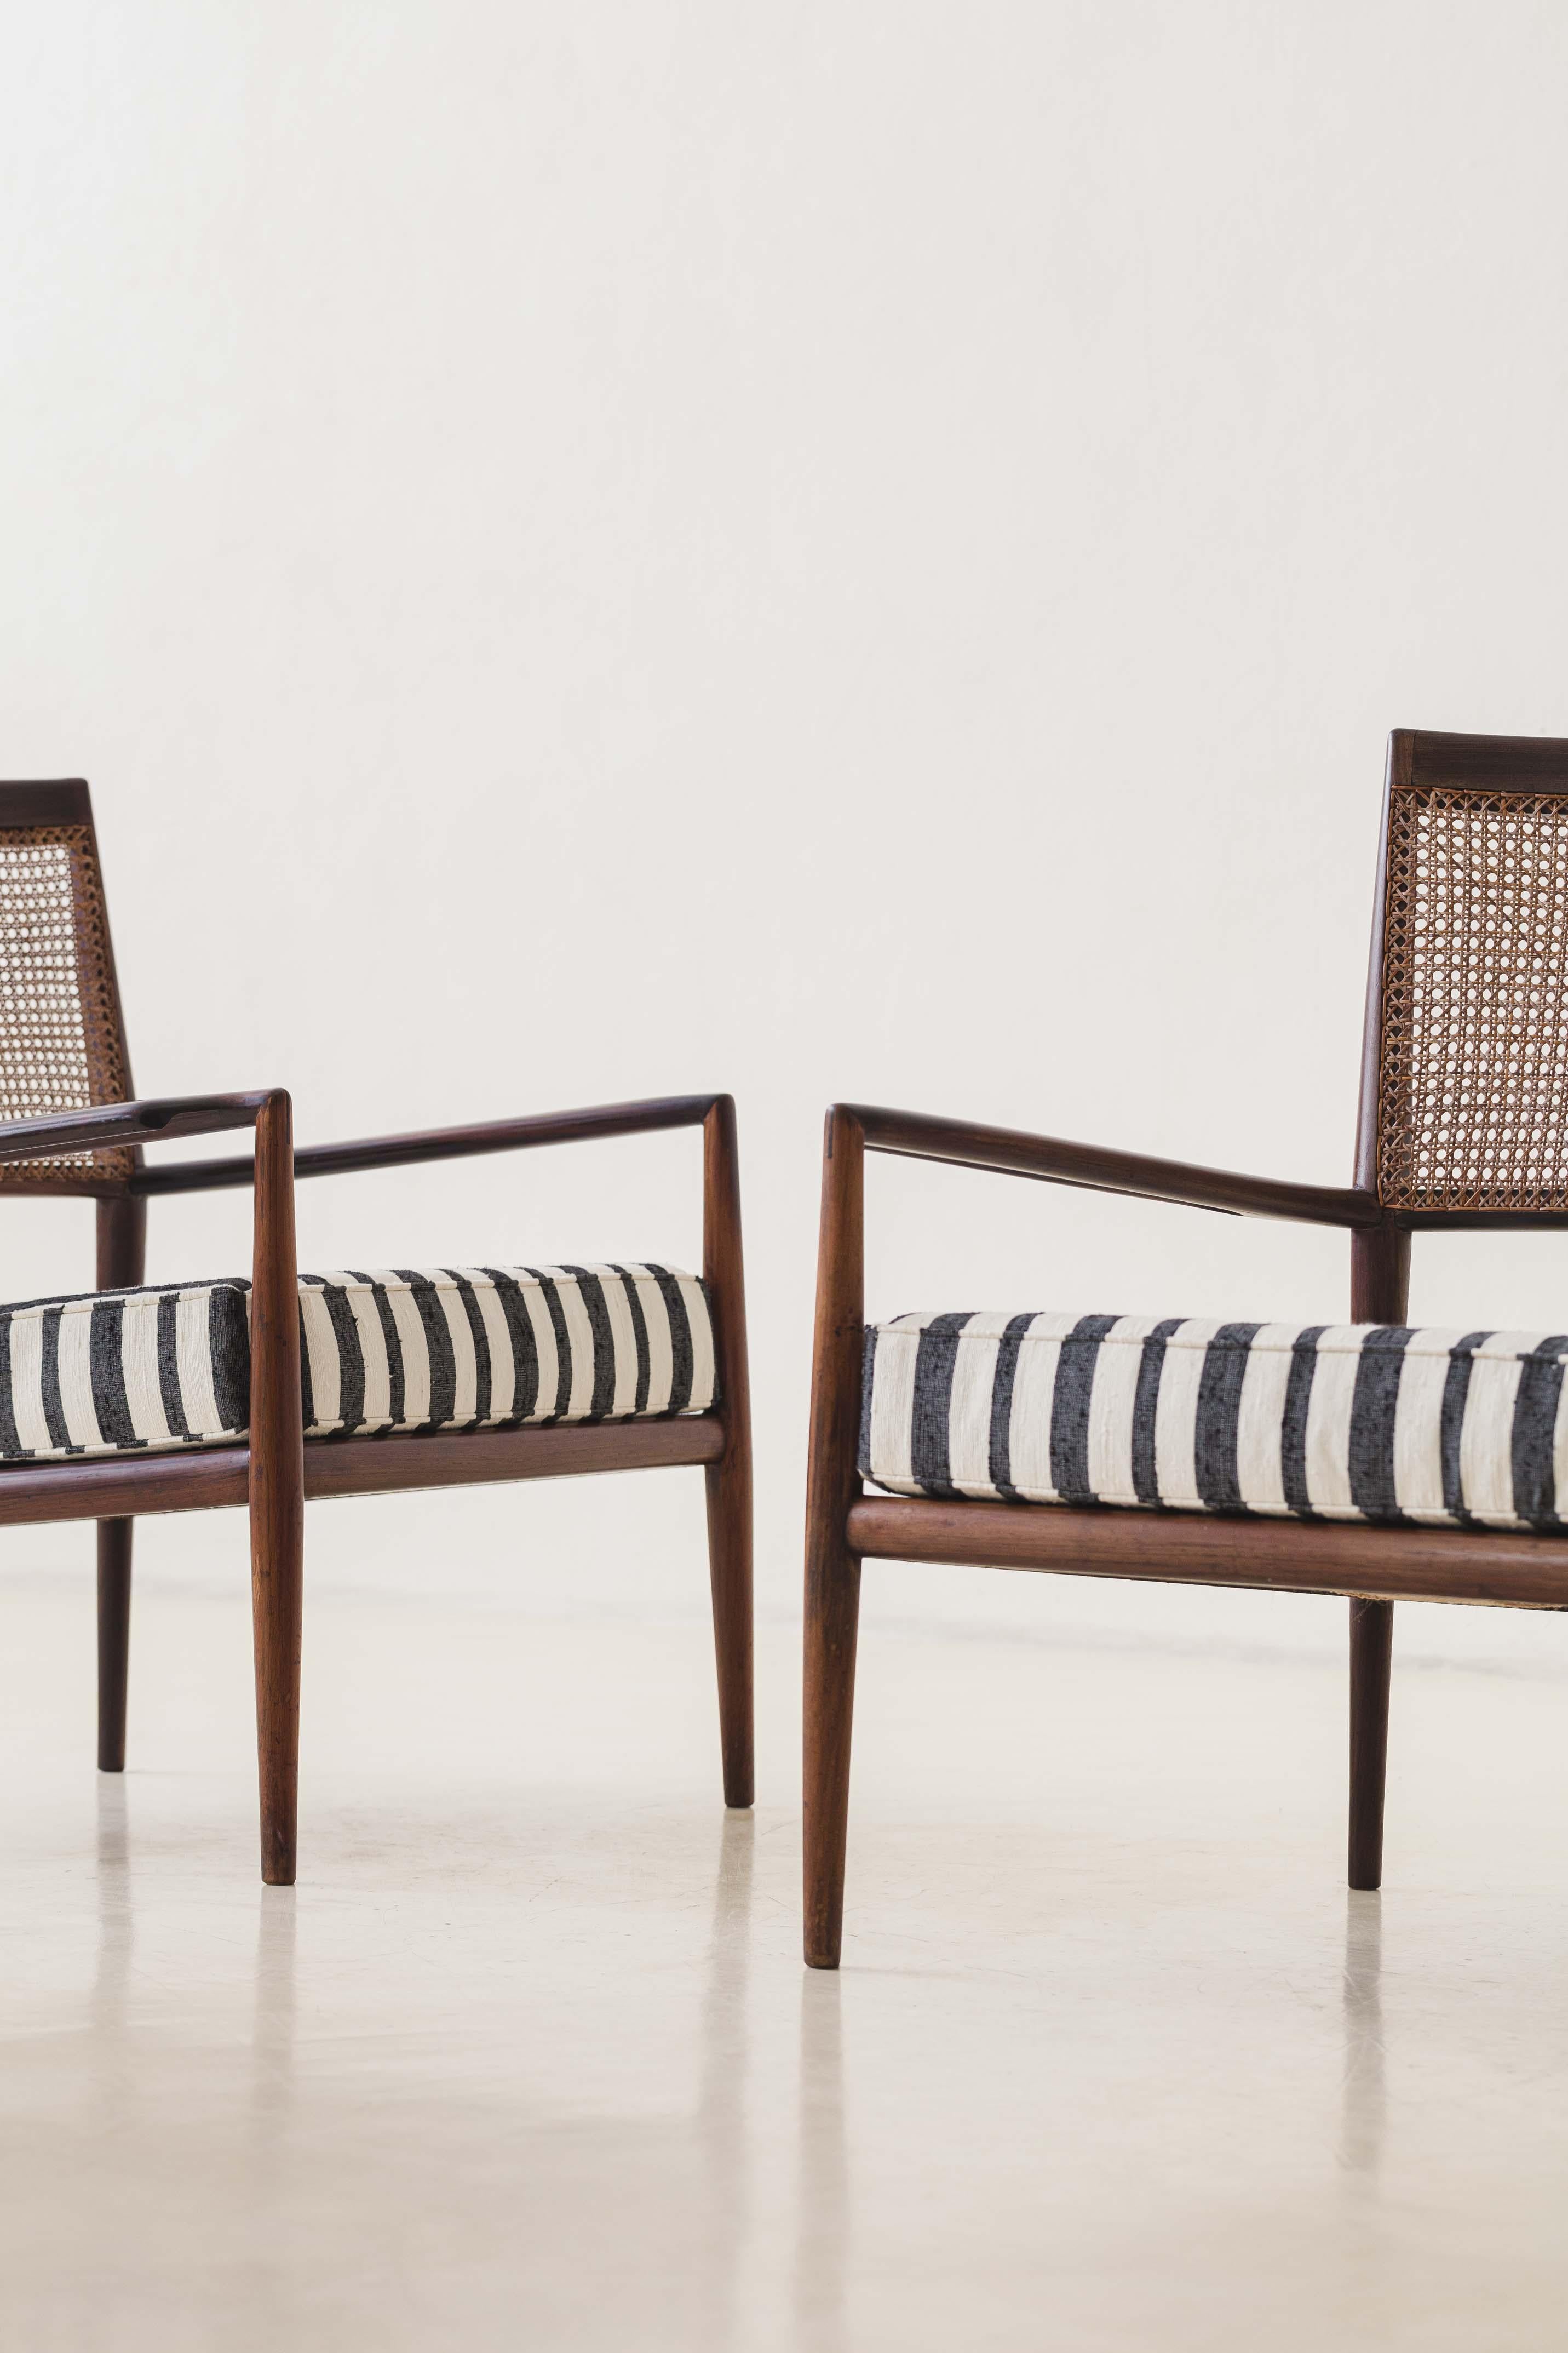 Pair of MF5 Armchairs by Brazilian Company Branco & Preto, Midcentury, 1953 For Sale 3